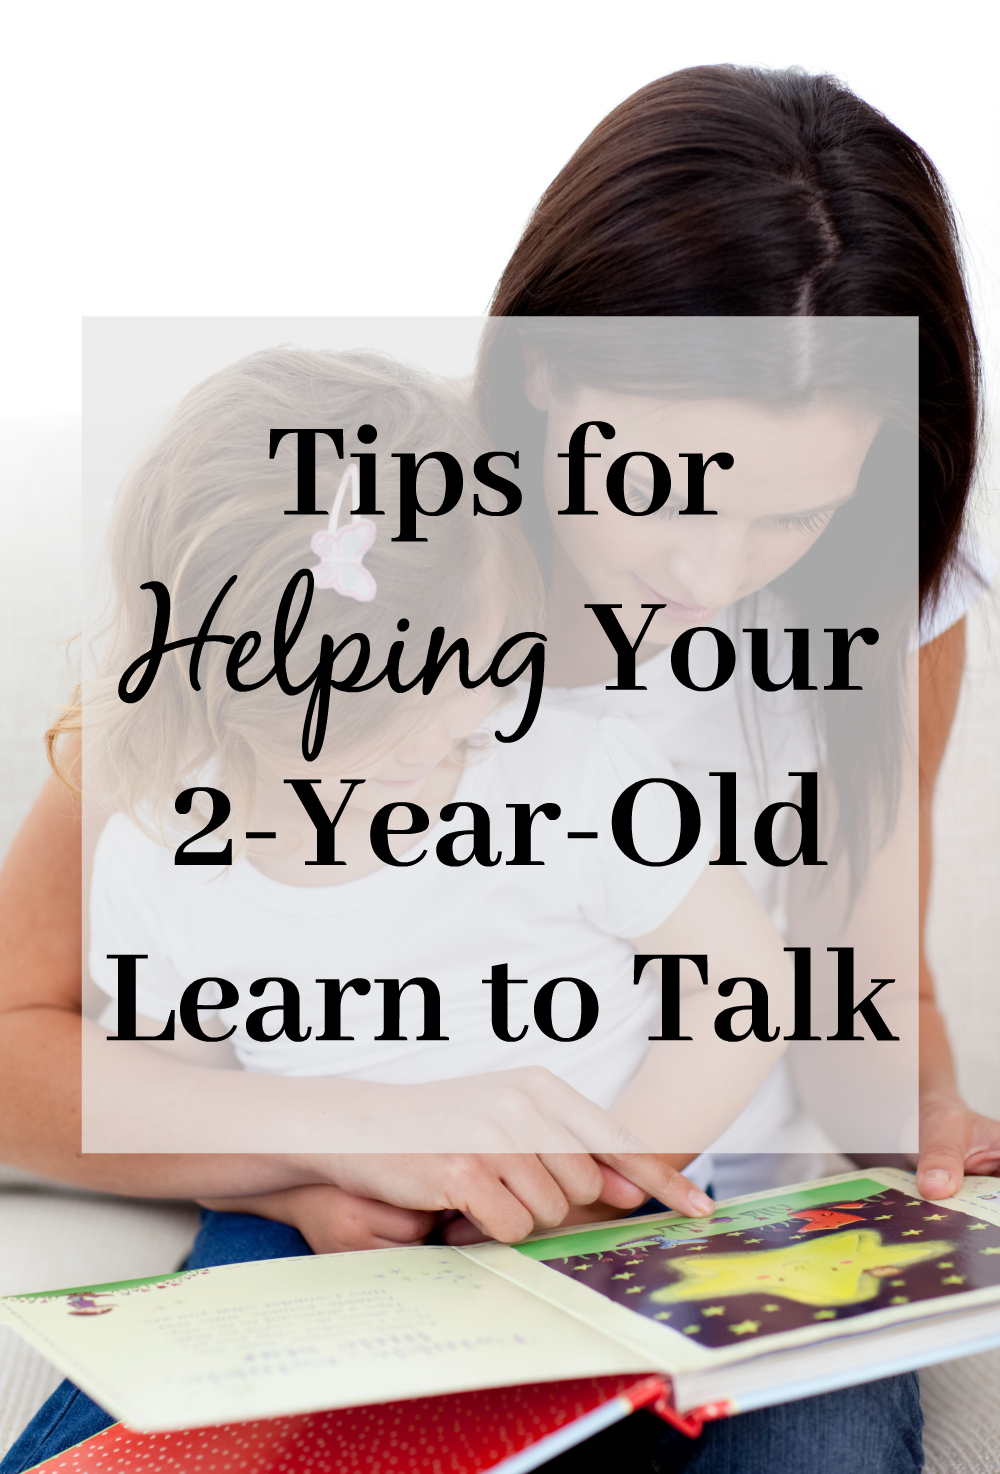 Tips for Helping Your 2-Year-Old Learn To Talk - Extreme Couponing Mom